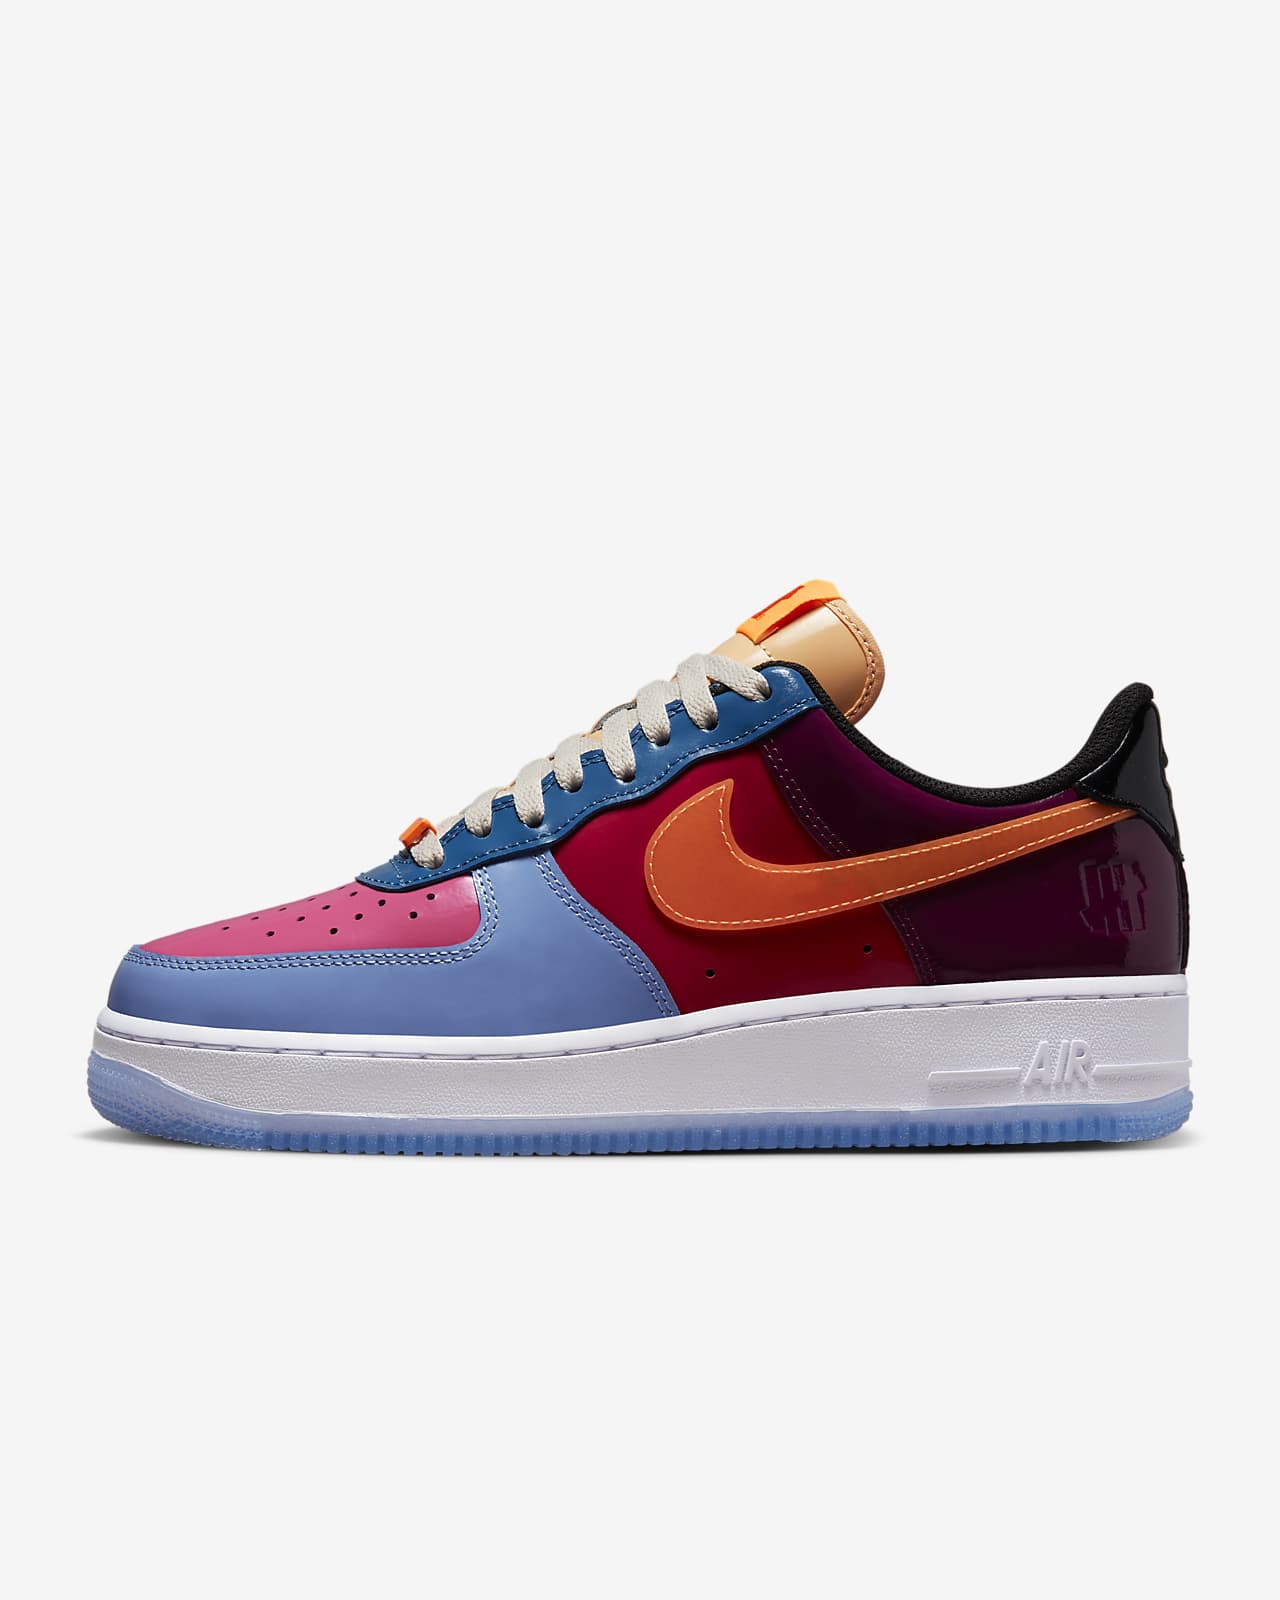 Nike Air Force 1 Low x UNDEFEATED Herrenschuh